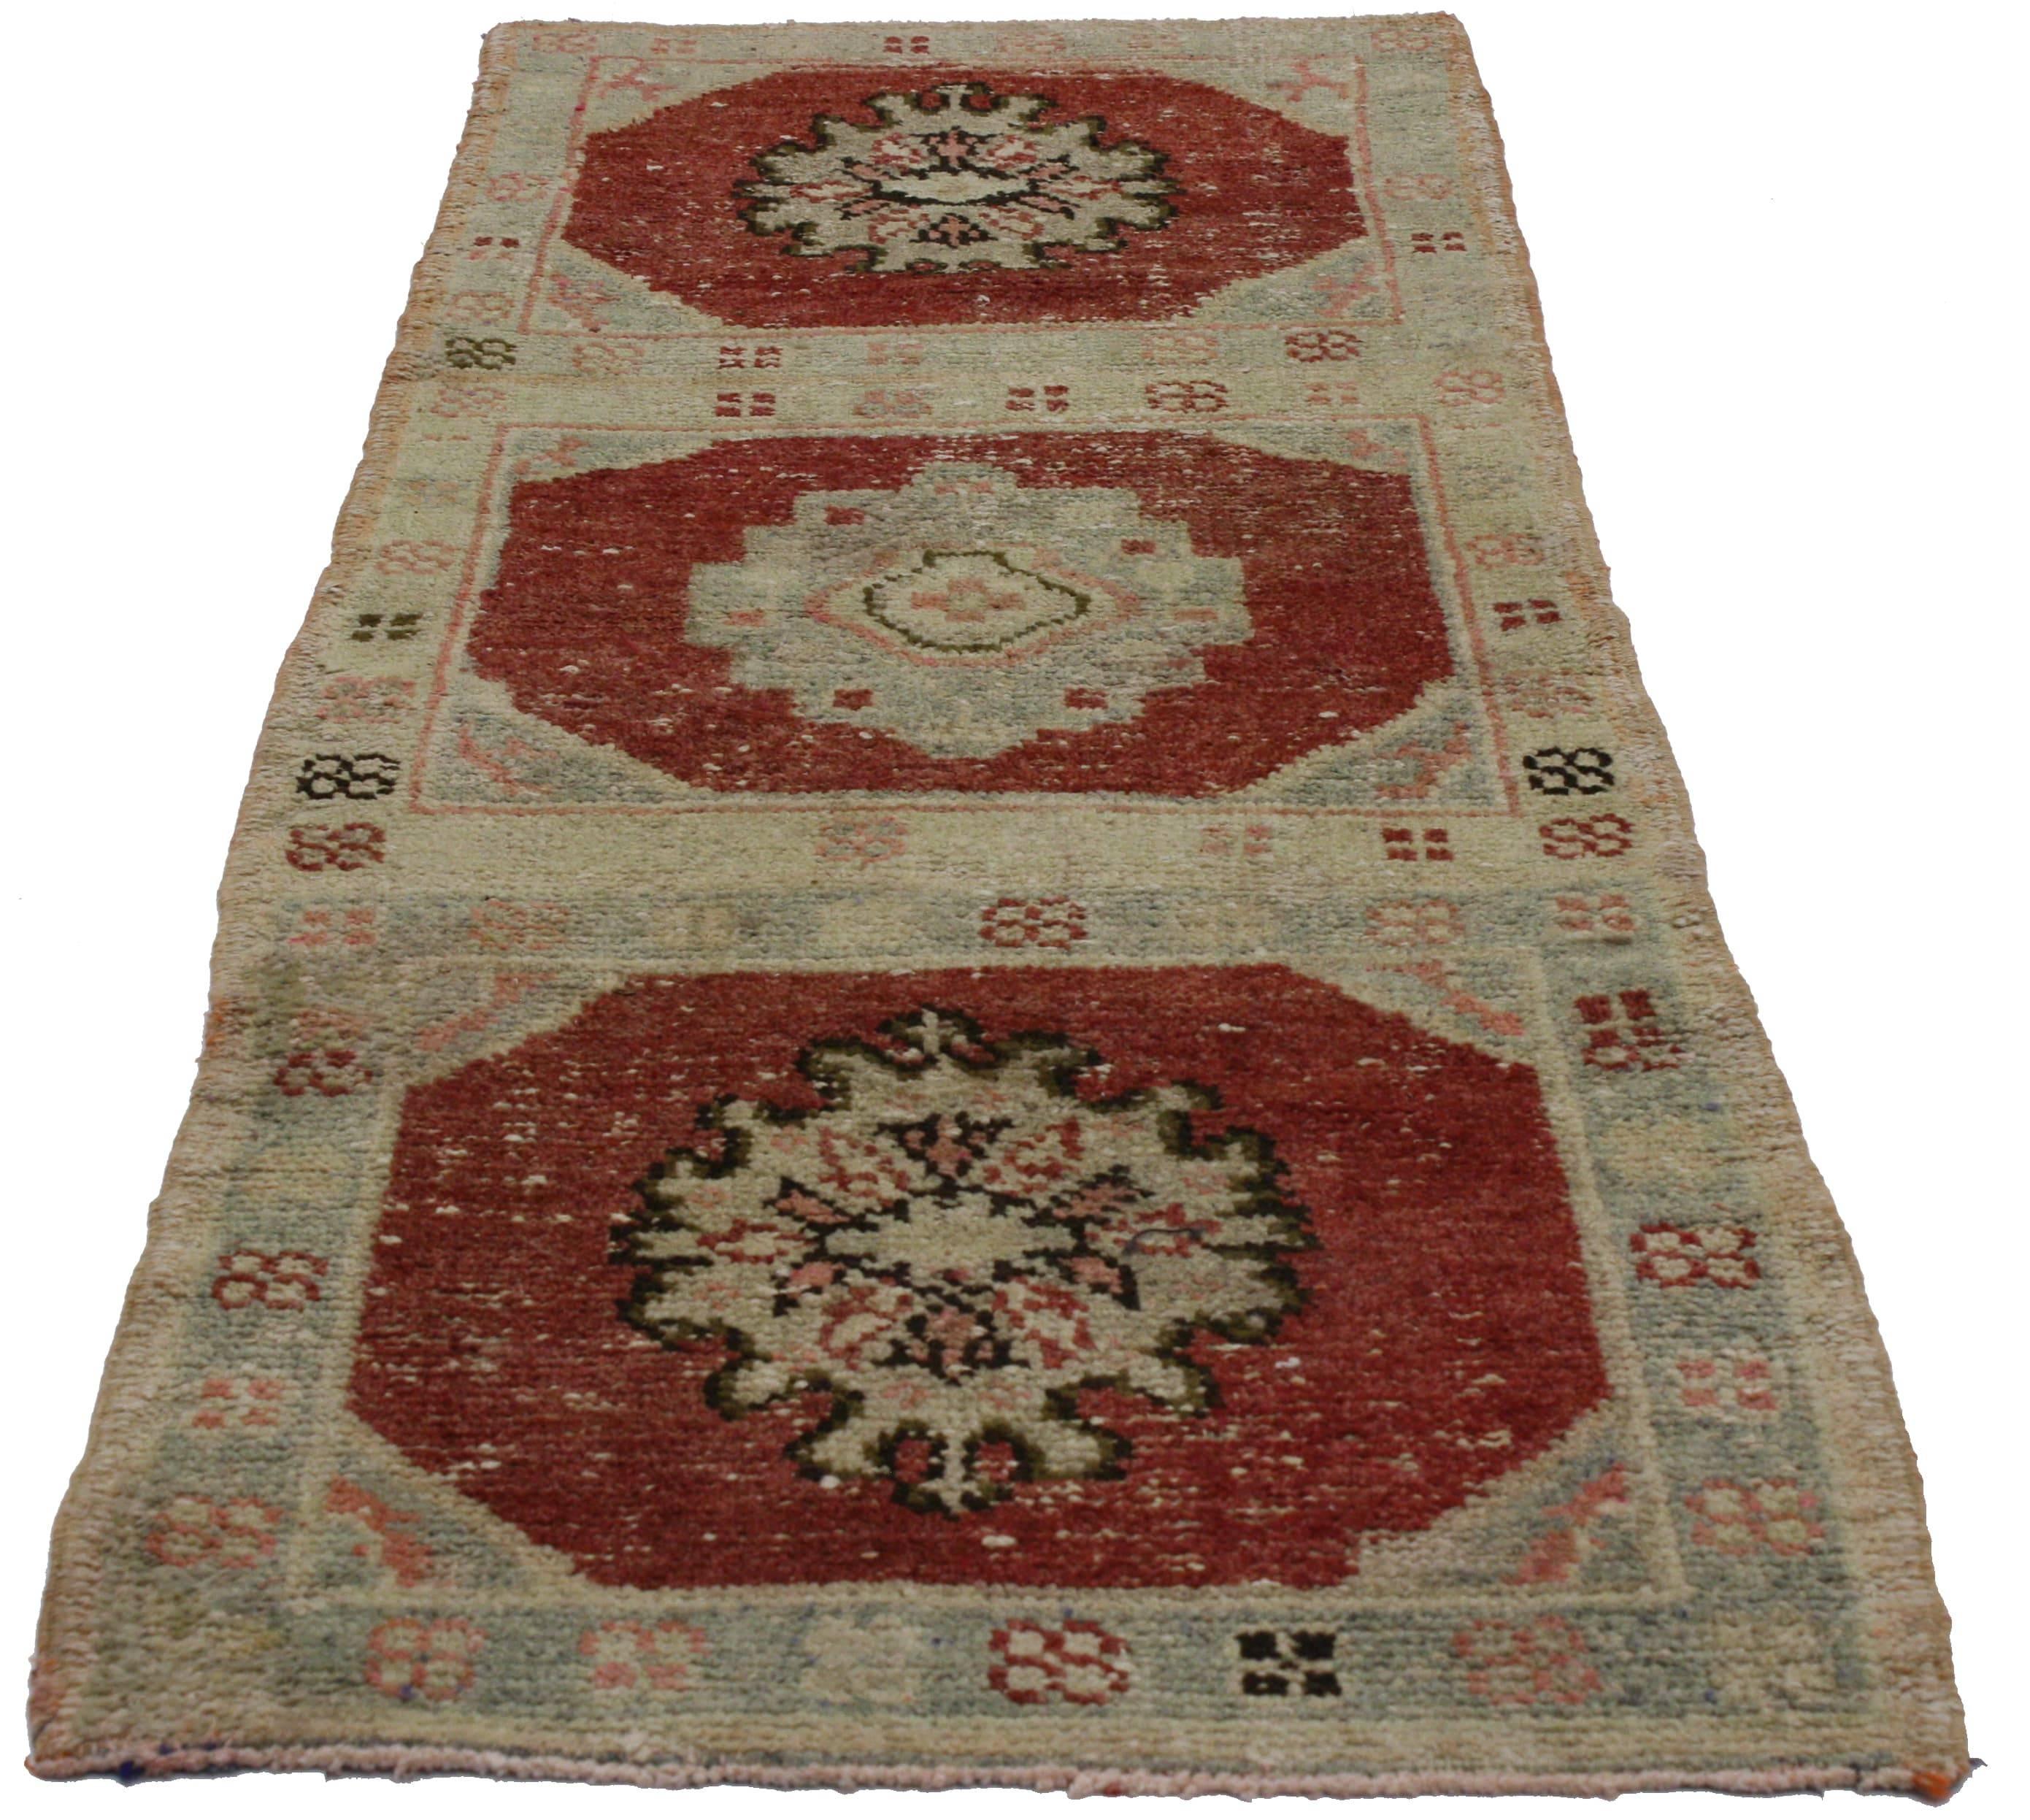 51561 Distressed Vintage Turkish Oushak Runner, Entry or Foyer Rug with Rustic Style. This hand knotted wool distressed vintage Turkish Oushak runner features three connected square panels with floral motifs. Each panel contains a large palmette in